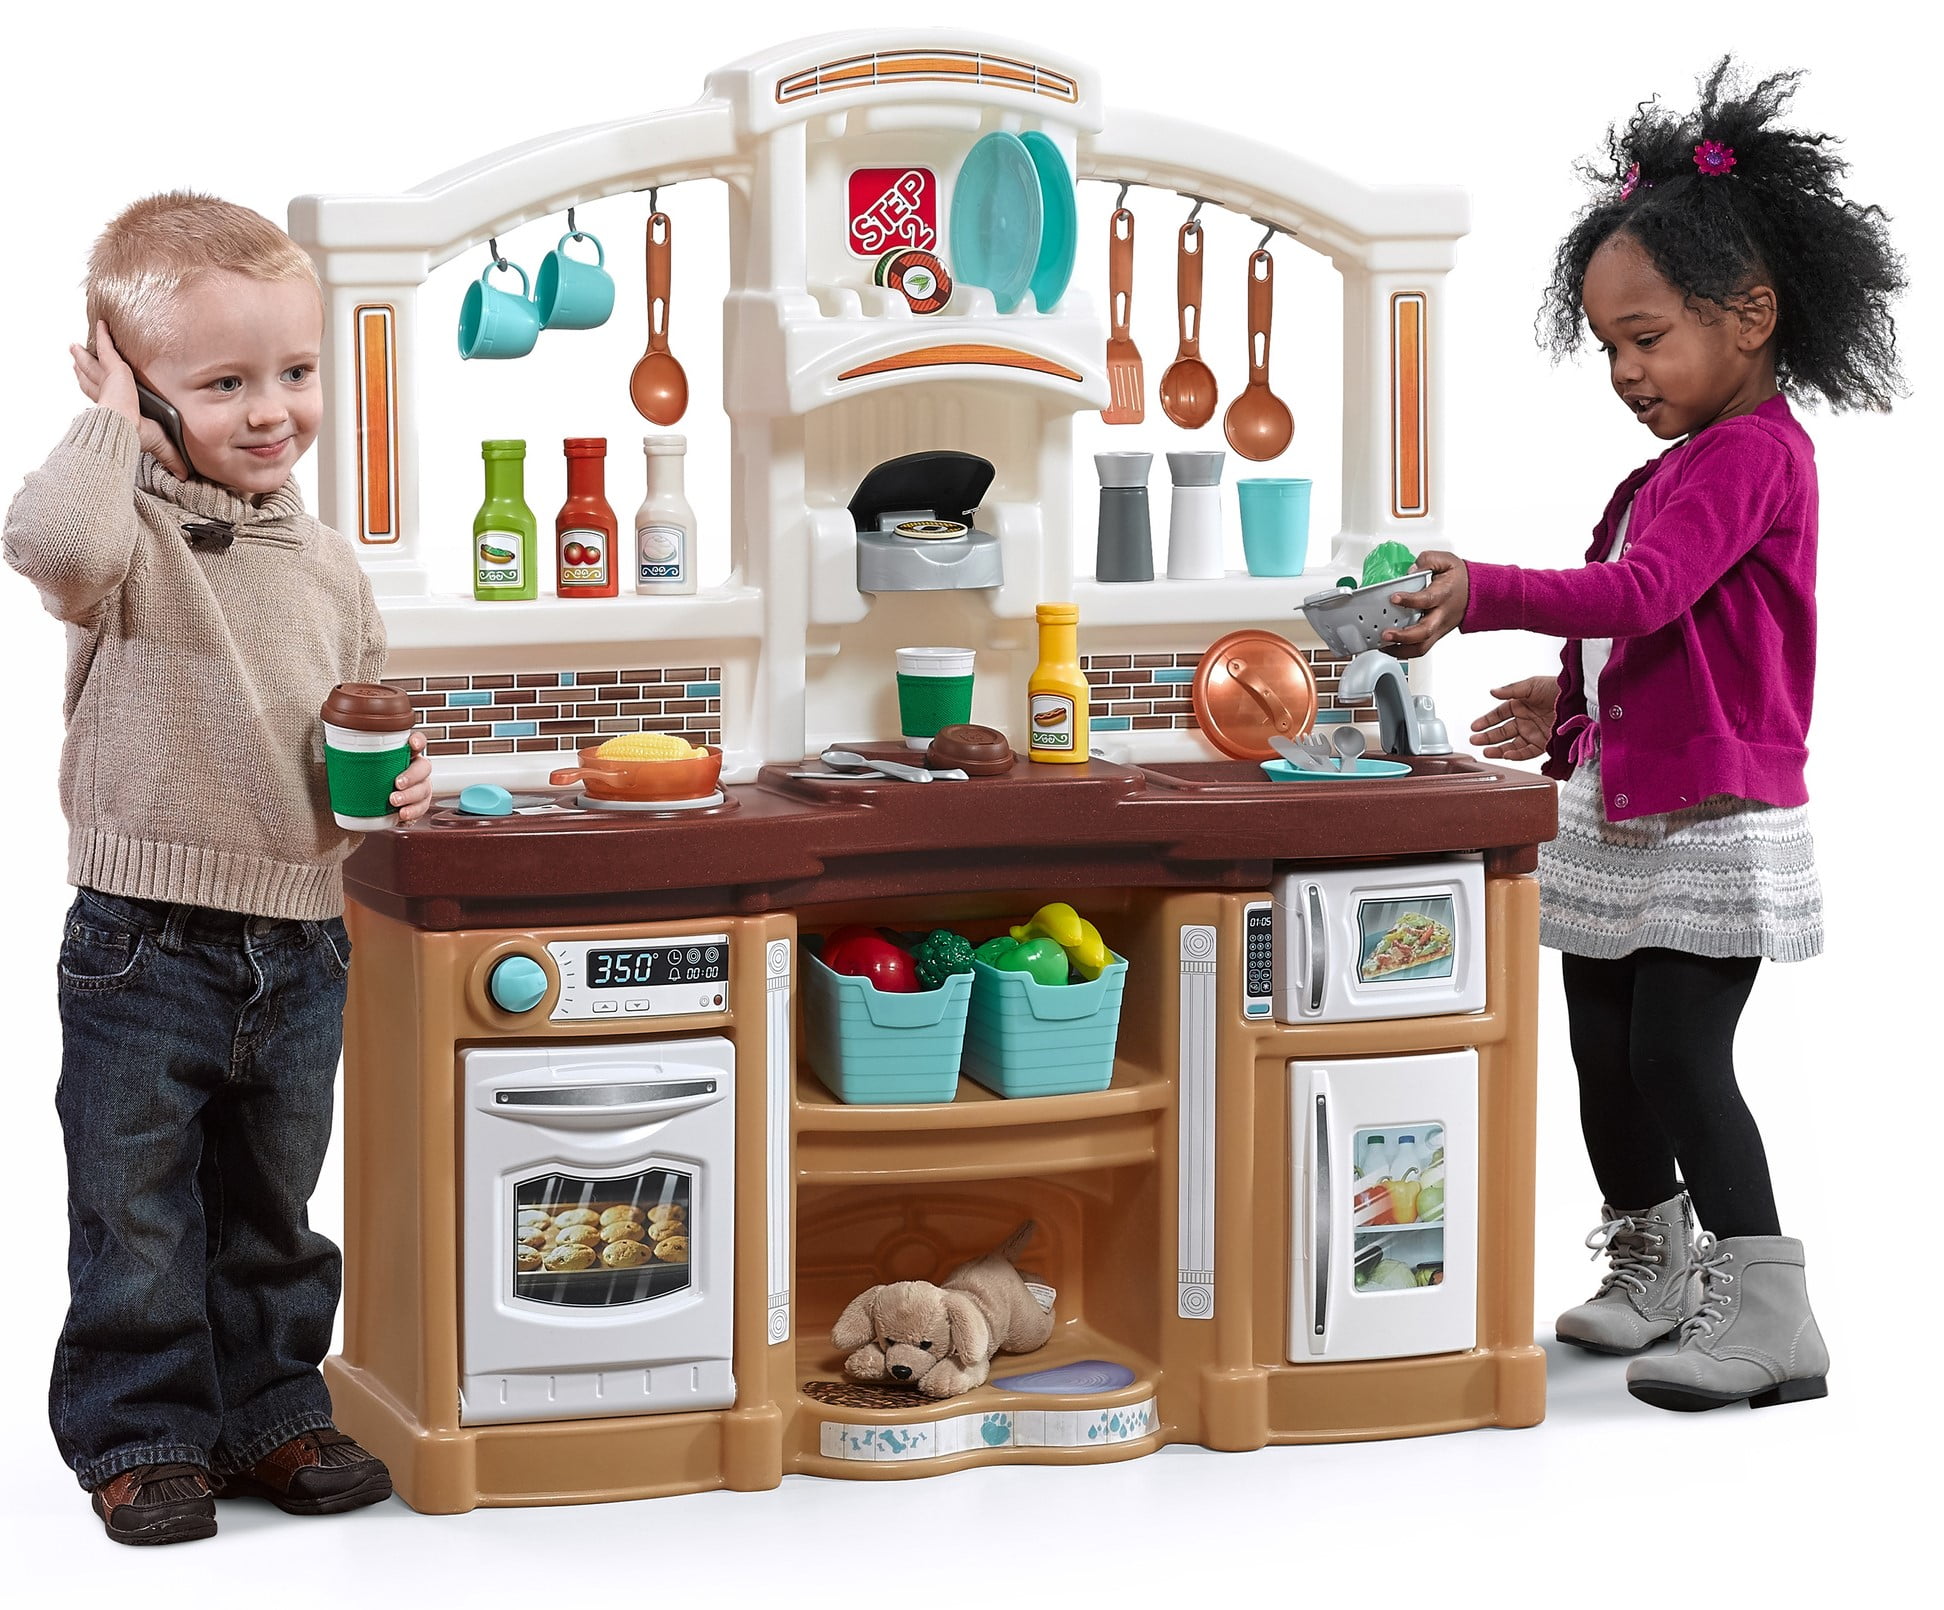 Step2 Fun With Friends Tan Toddler Plastic Kitchen Play Set - 2